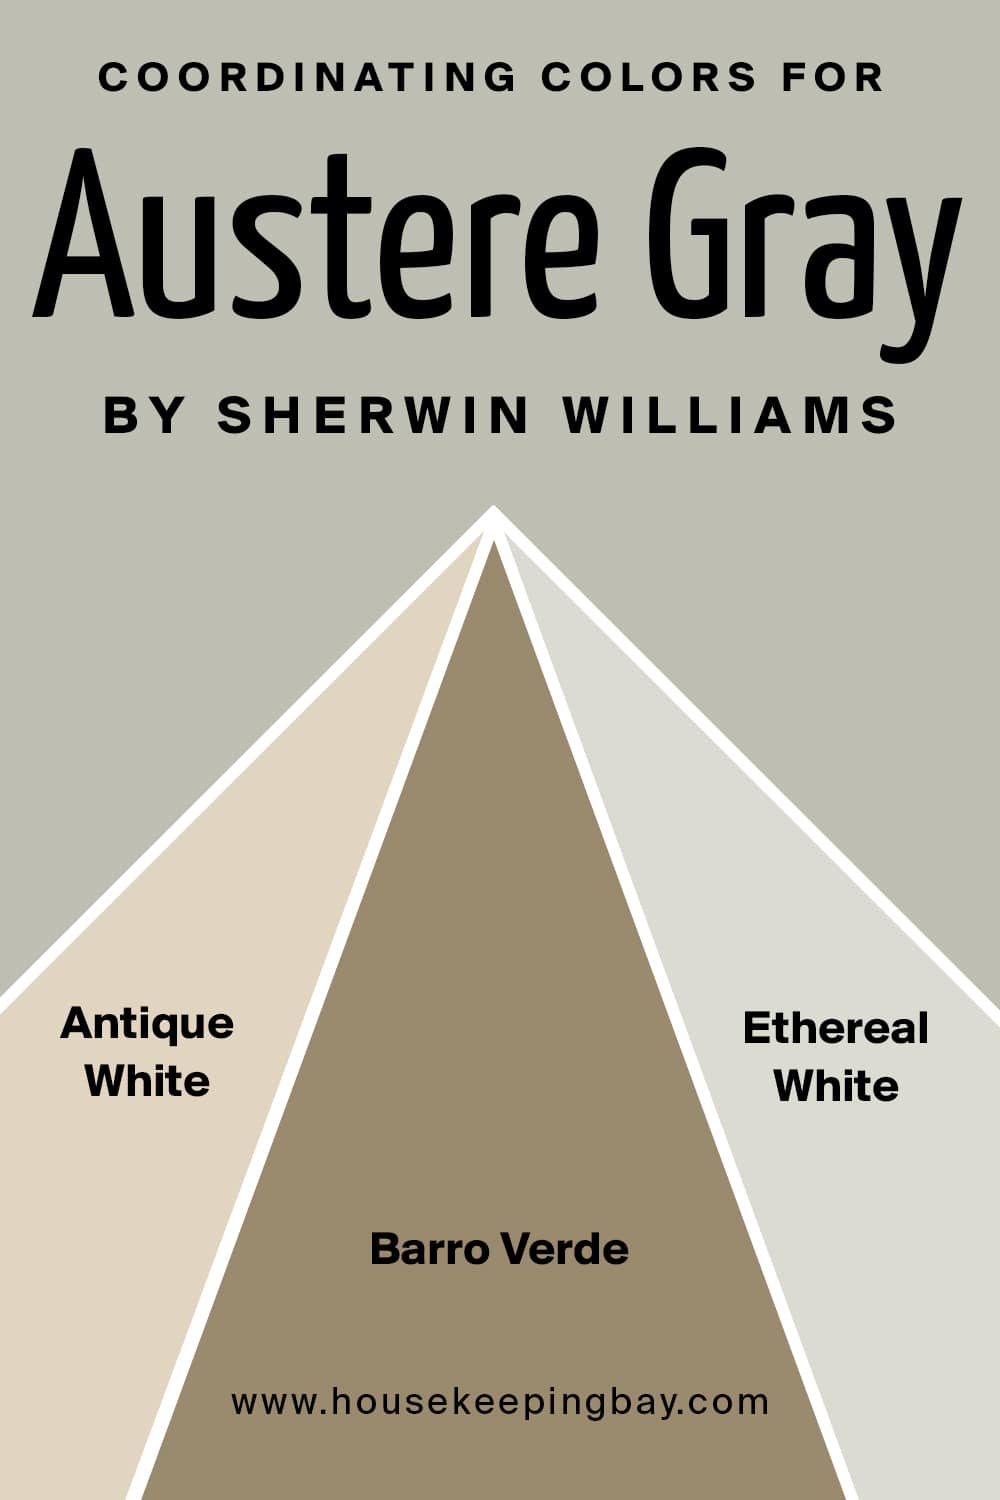 Coordinating Colors for Austere Gray by Sherwin Williams